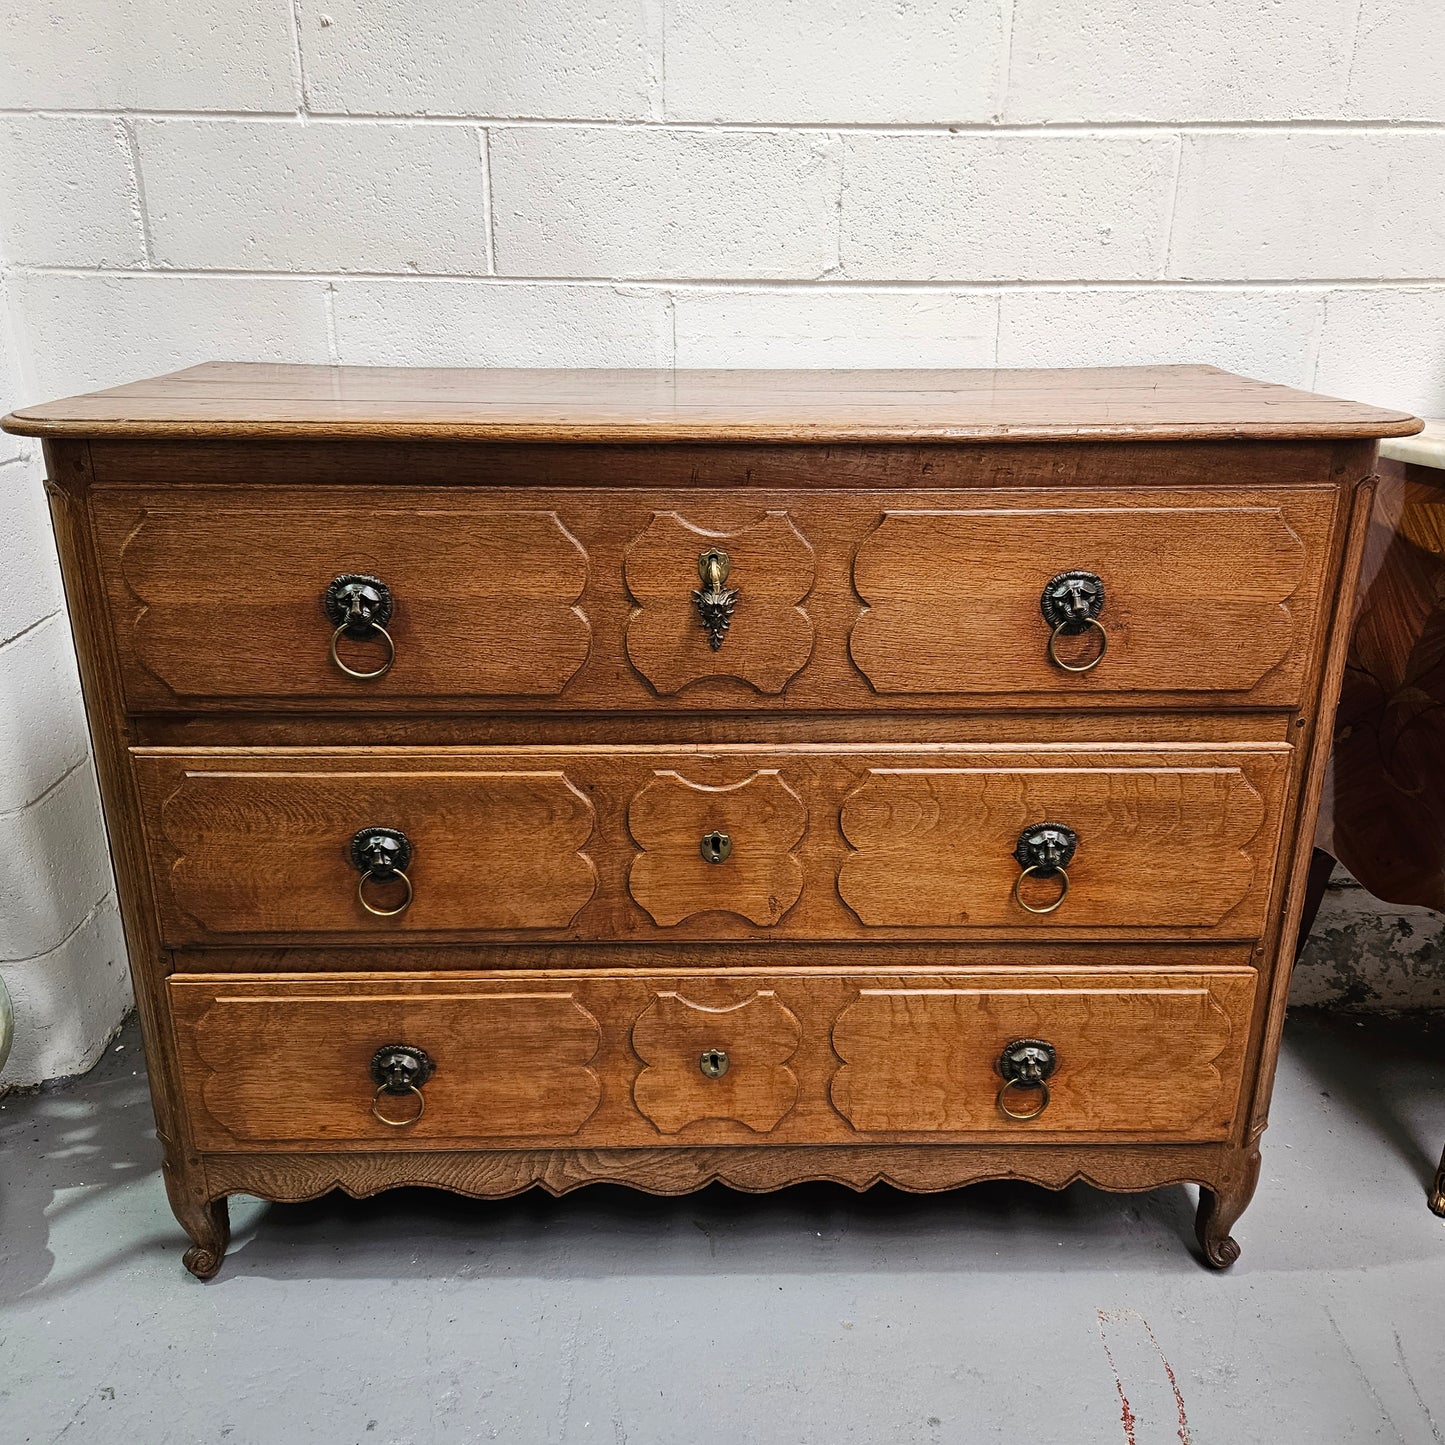 Early 19th Century French Oak Wooden Commode With Stunning Lion Handles